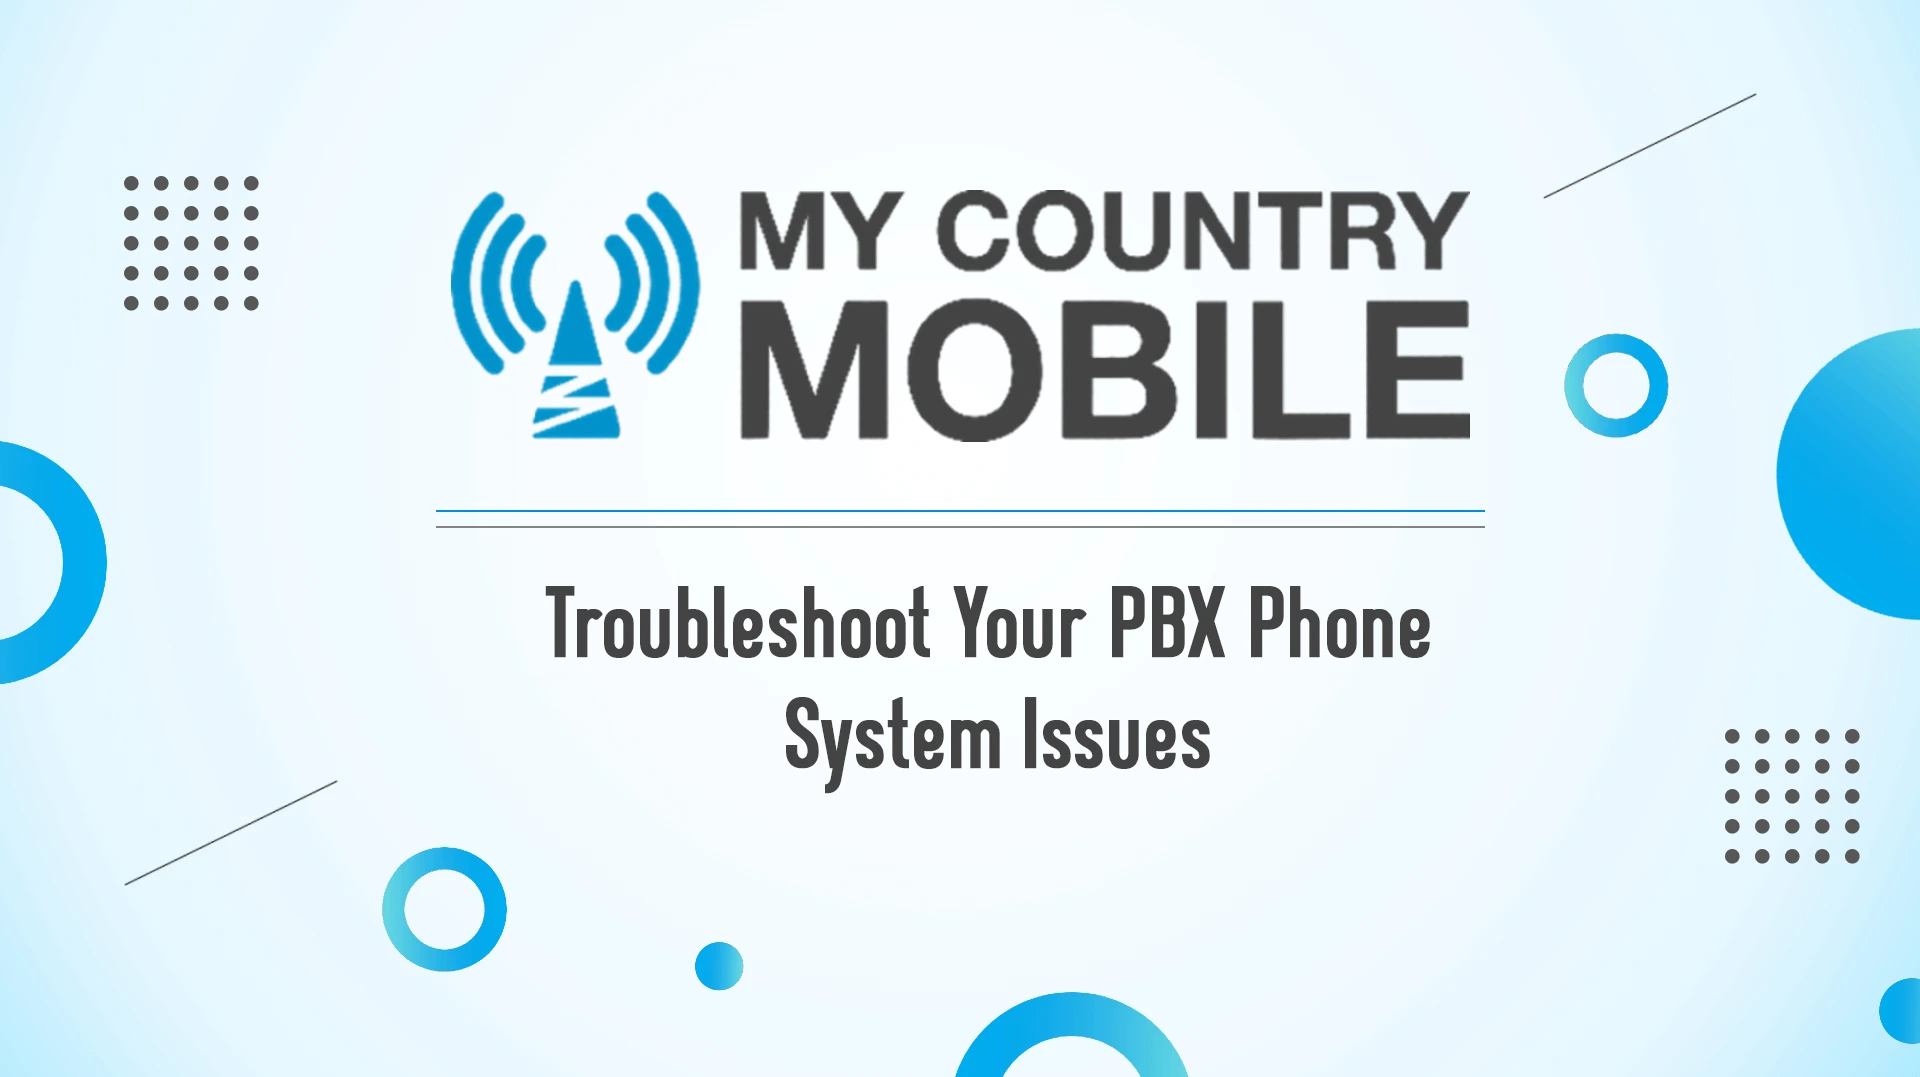 Troubleshoot Your PBX Phone System Issues